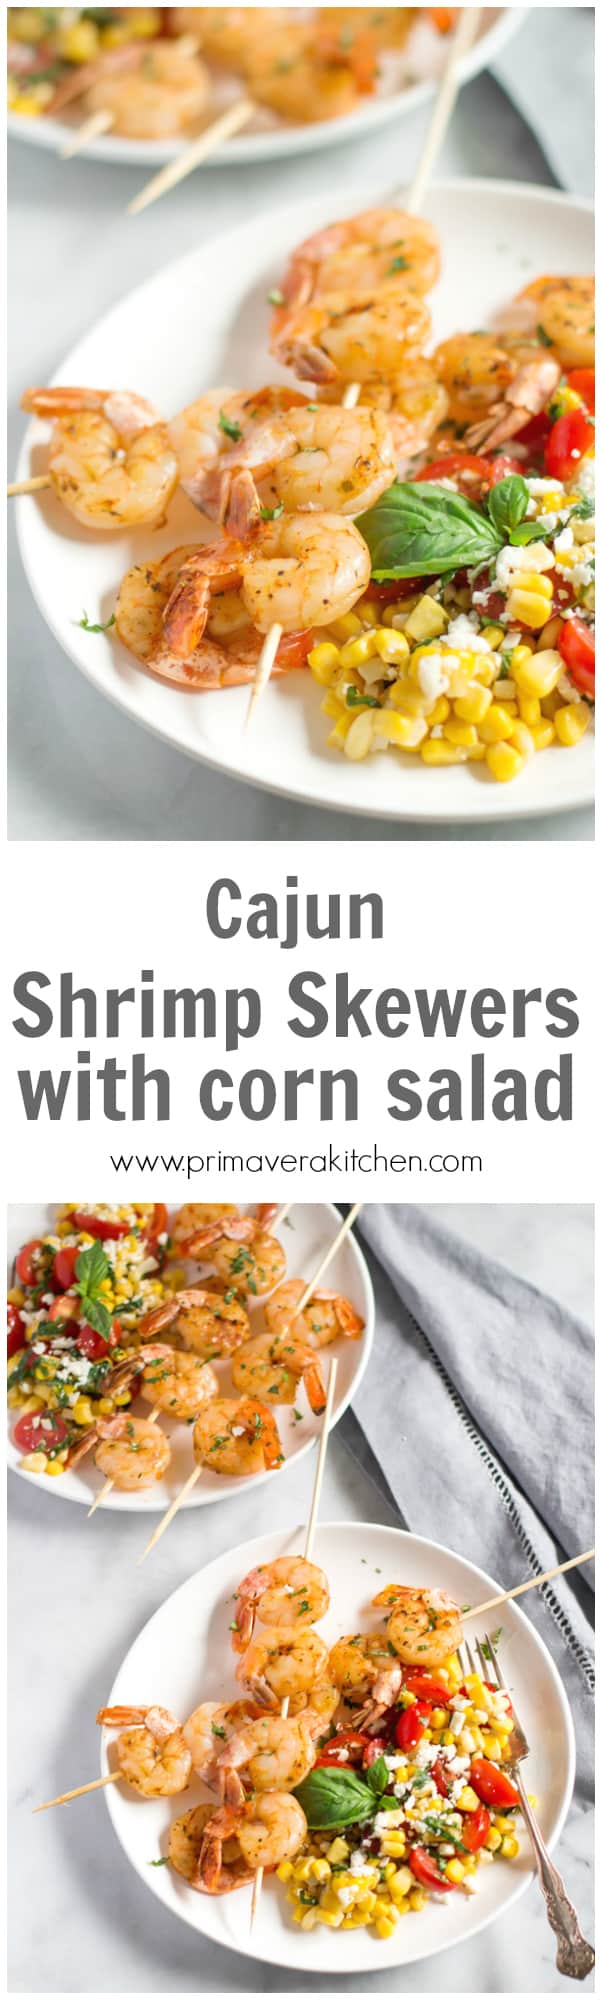 Cajun Shrimp Skewers with Corn Salad - This Cajun Shrimp Skewers with Corn Salad is an easy and practical summertime BBQ dish for lunch or dinner. This is a gluten-free dish, which takes only 15 minutes to be ready. 